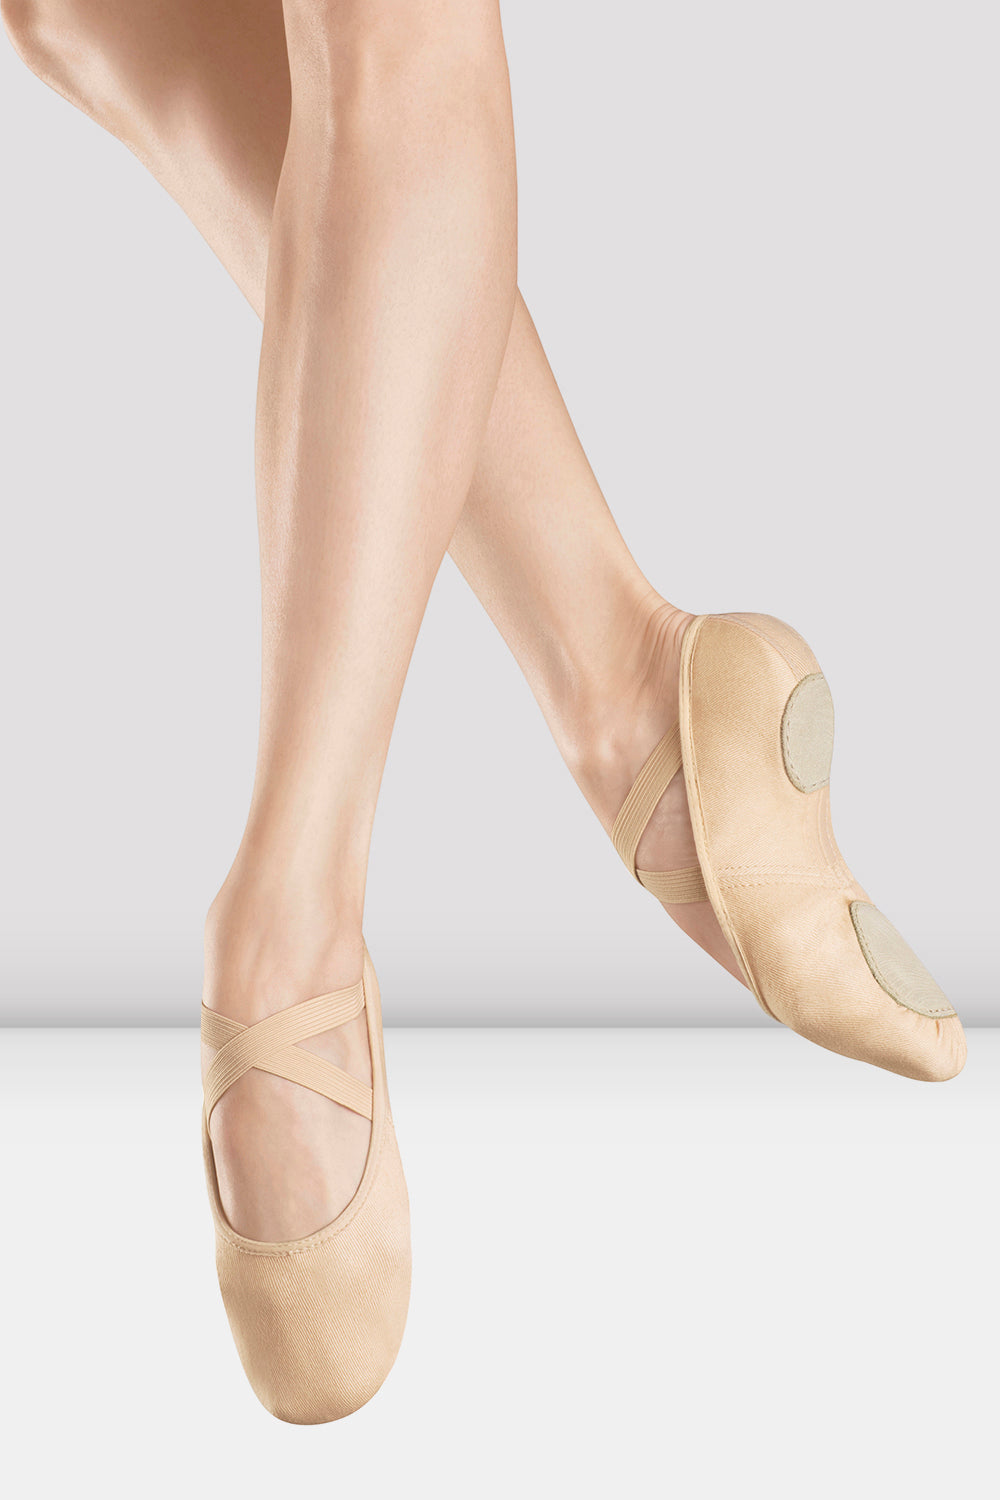 BLOCH Ladies Infinity Stretch Canvas Ballet Shoes, Light Sand Canvas